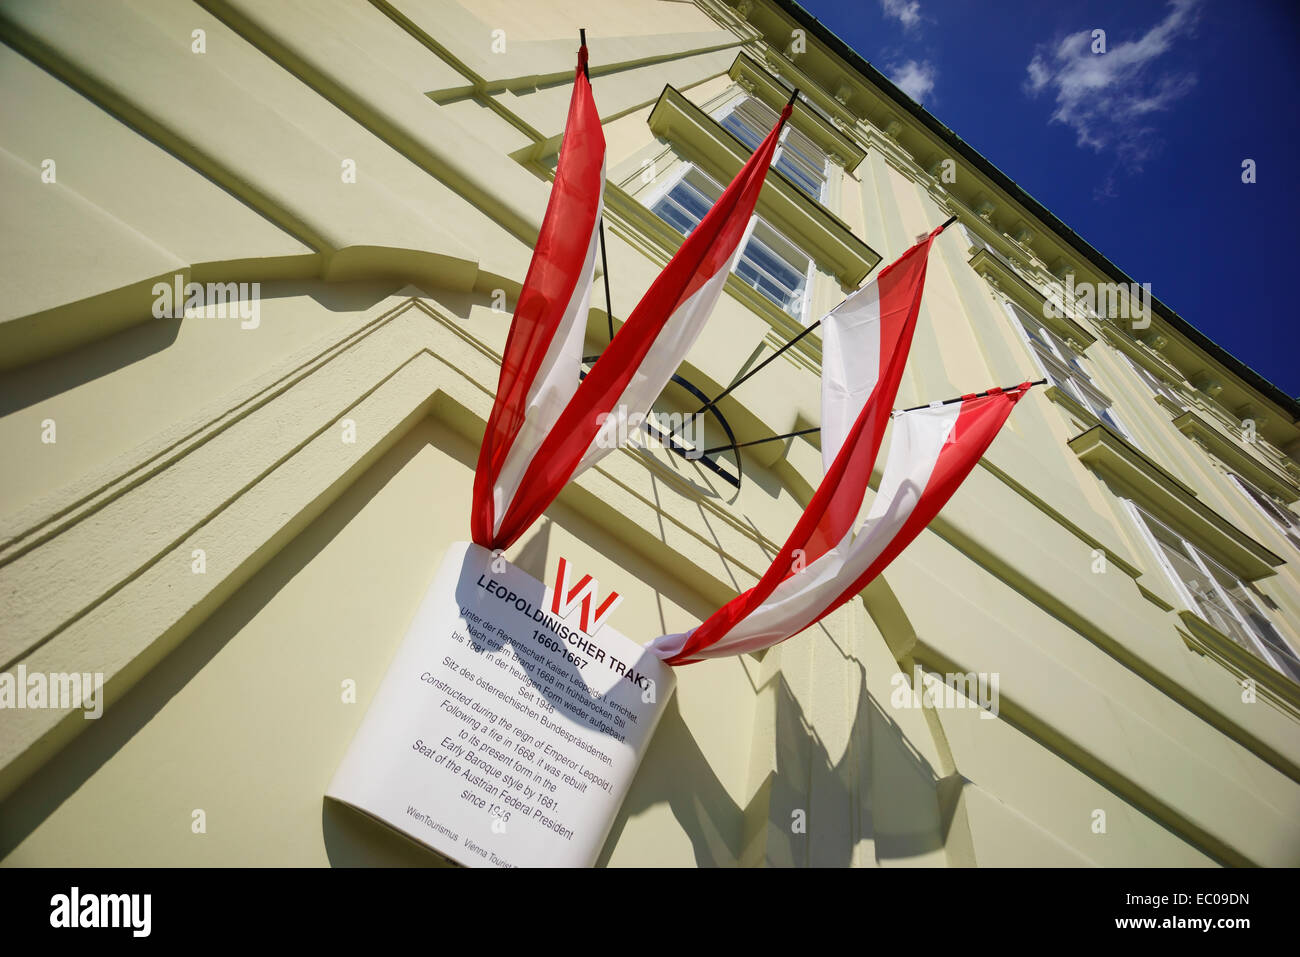 Red and white flags marking a historic location at the Hofburg Palace, Vienna, Austria. Stock Photo